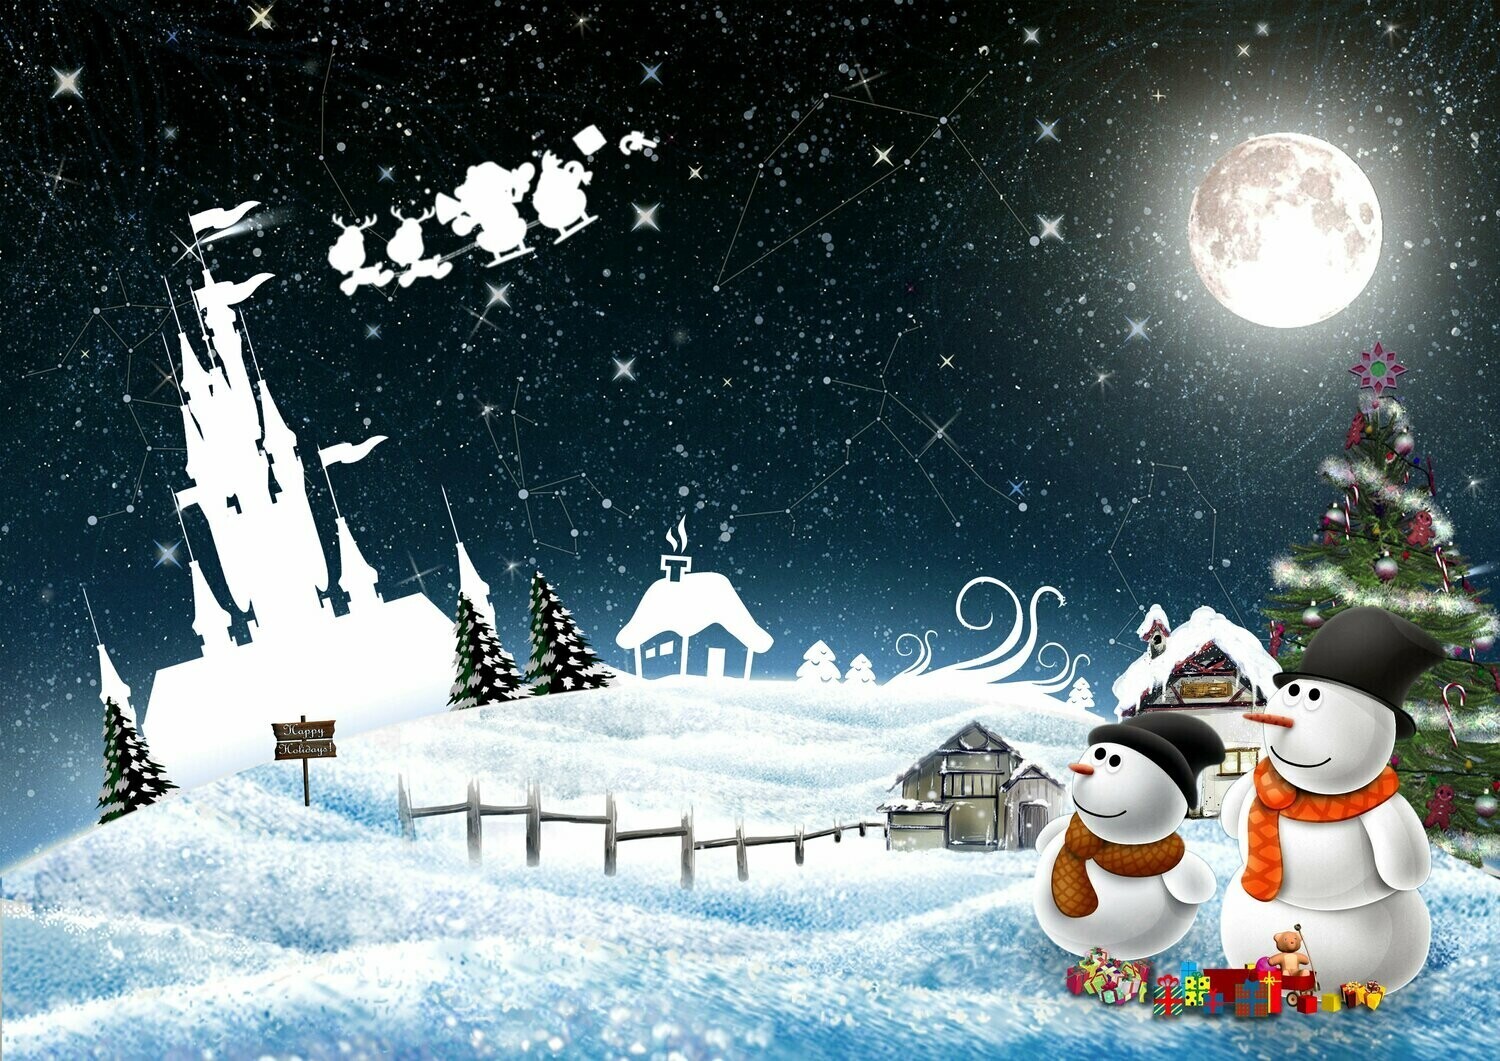 Snowman Scenery - Specially ordered for you. Delivery is approximately 4 - 6 weeks.